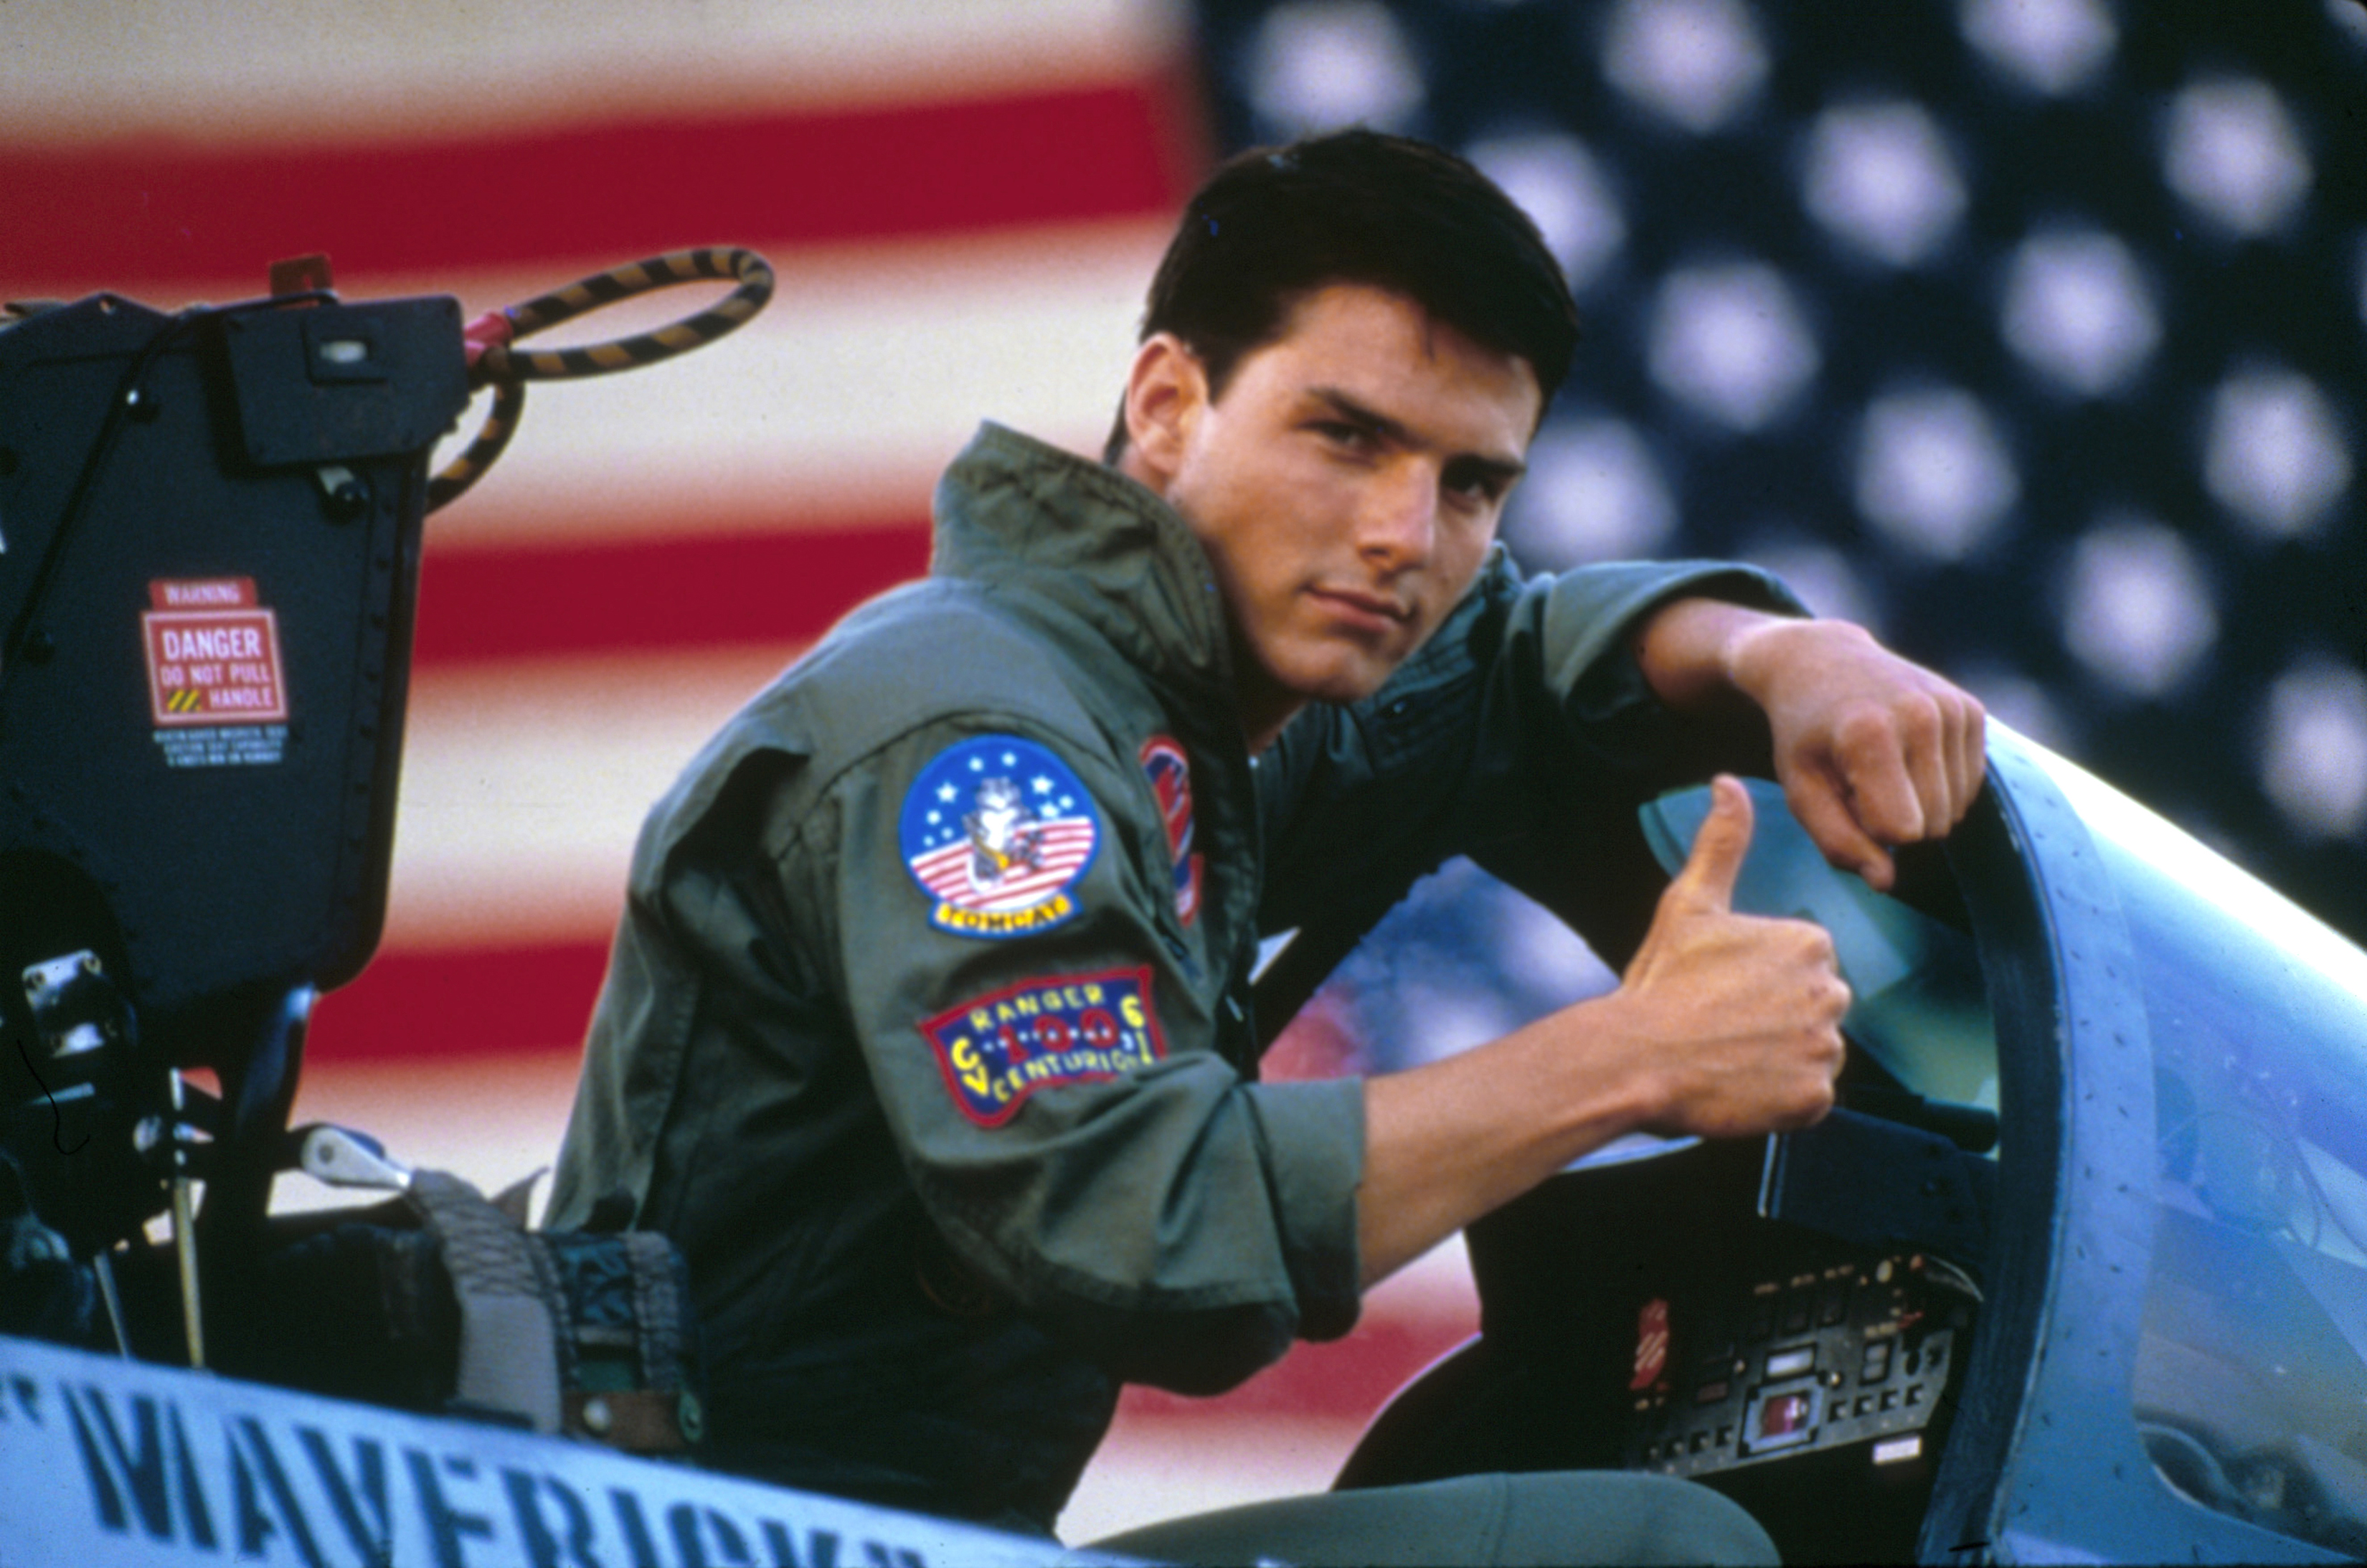 Tom Cruise on the set of Top Gun, directed by Tony Scott. Photos from the set of the upcoming sequel "Top Gun: Maverick" were recently posted to Instagram. (Photo by Paramount Pictures/Sunset Boulevard/Corbis via Getty Images)